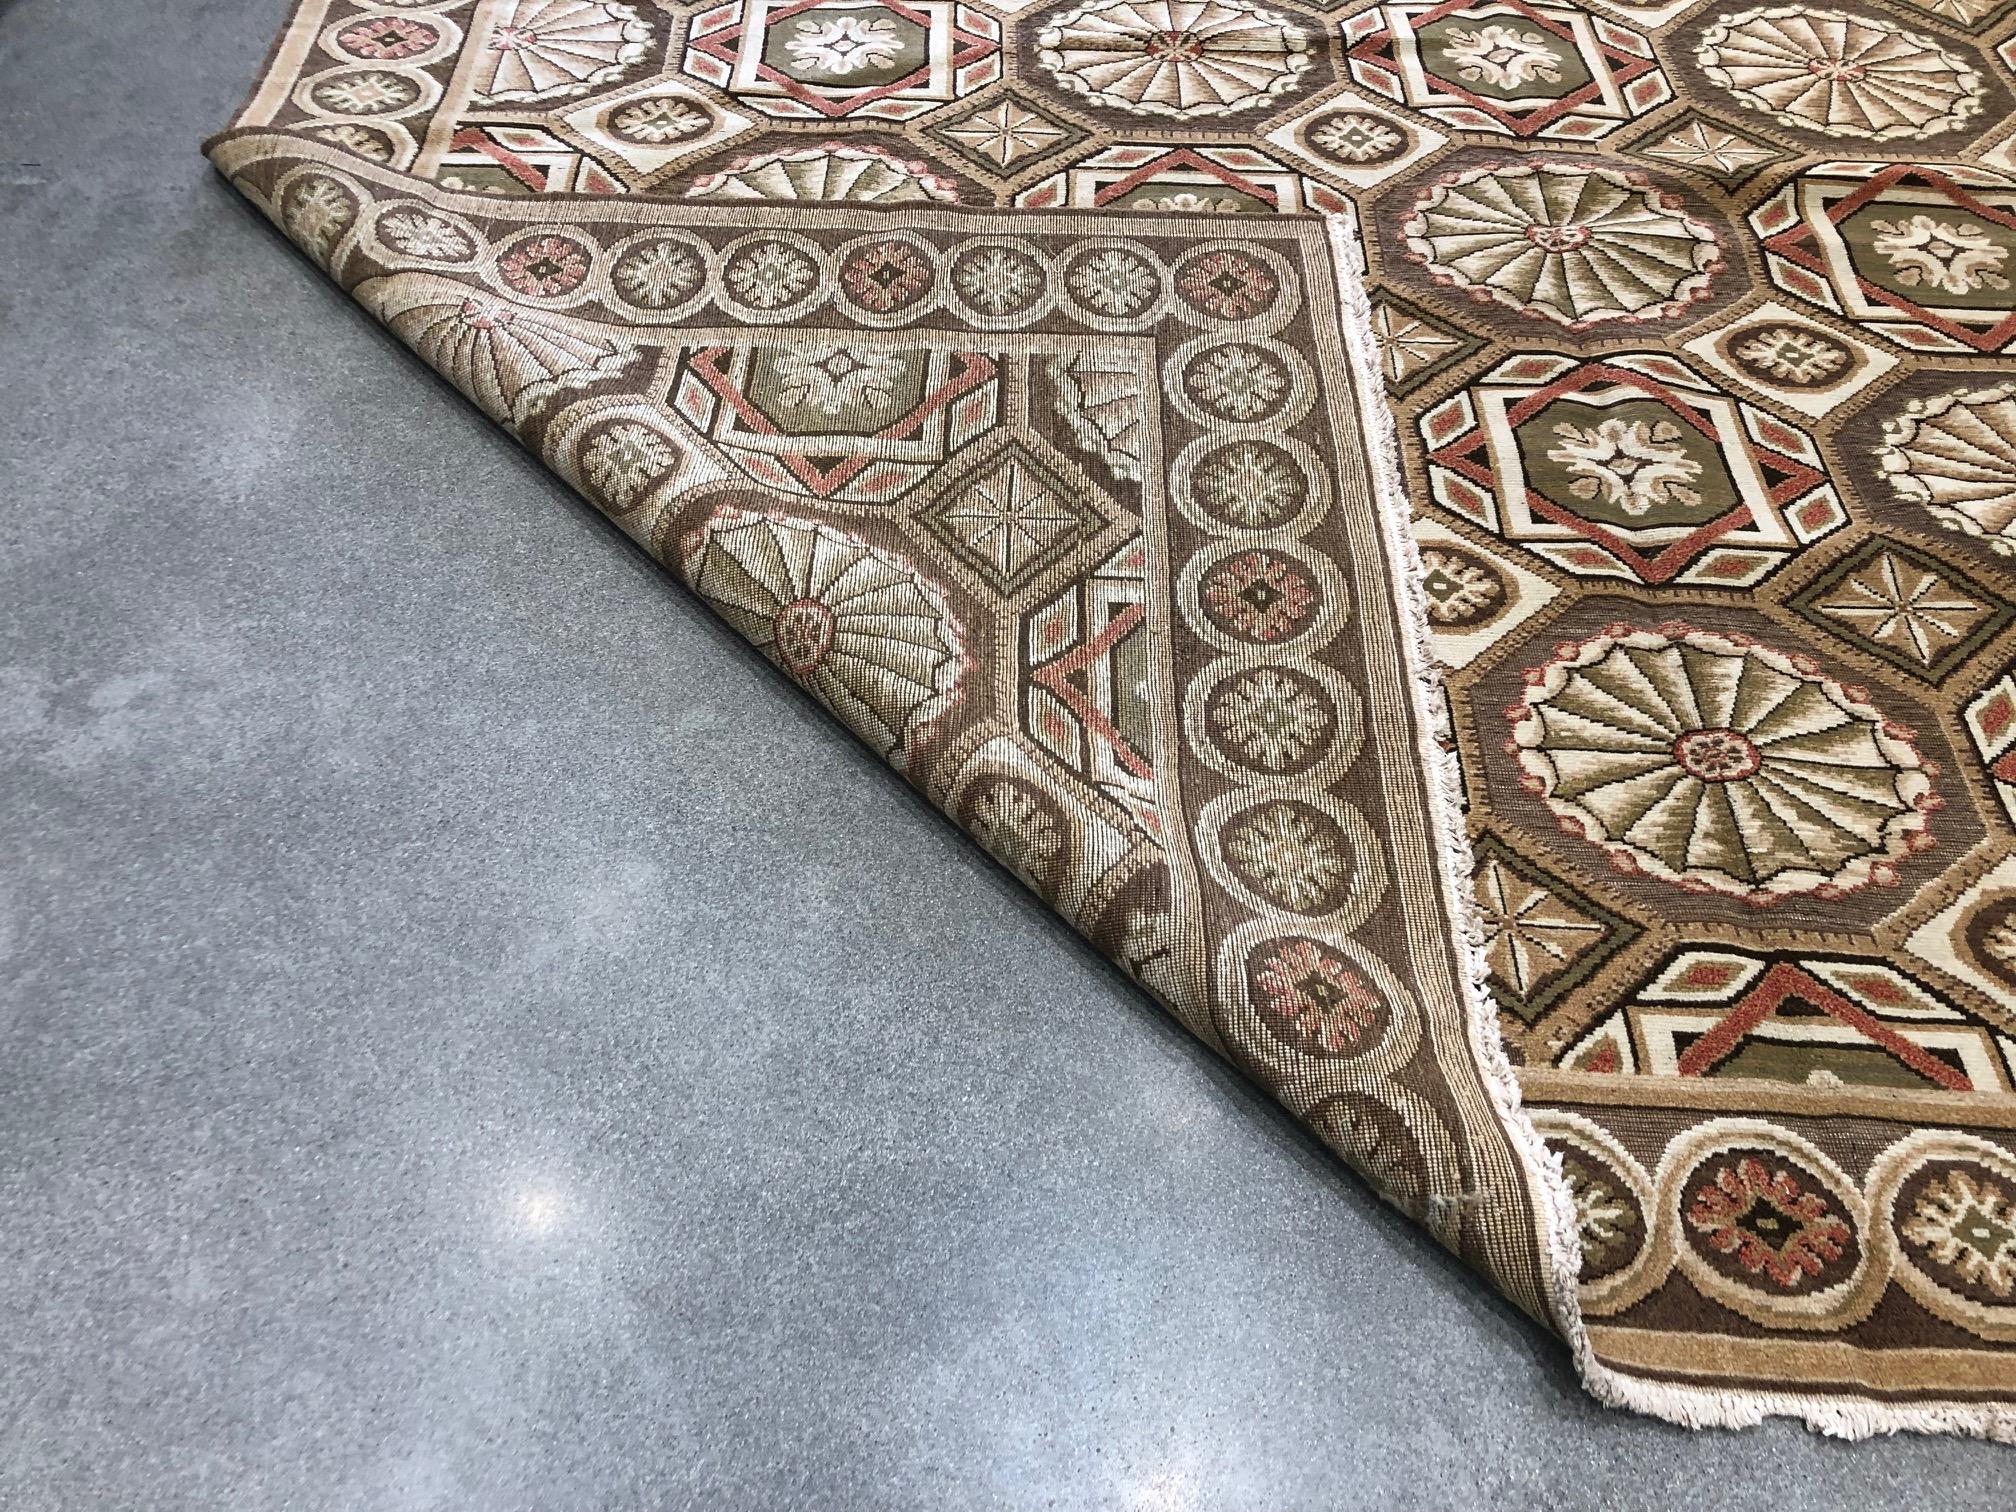 An intriguing pattern and unusual colors combine to create a rug that stands out from the rest. Bold shapes in brown, rust and cream tones in the large centre pane create a kaleidescope effect while starbursts in similar tones line the edges. A